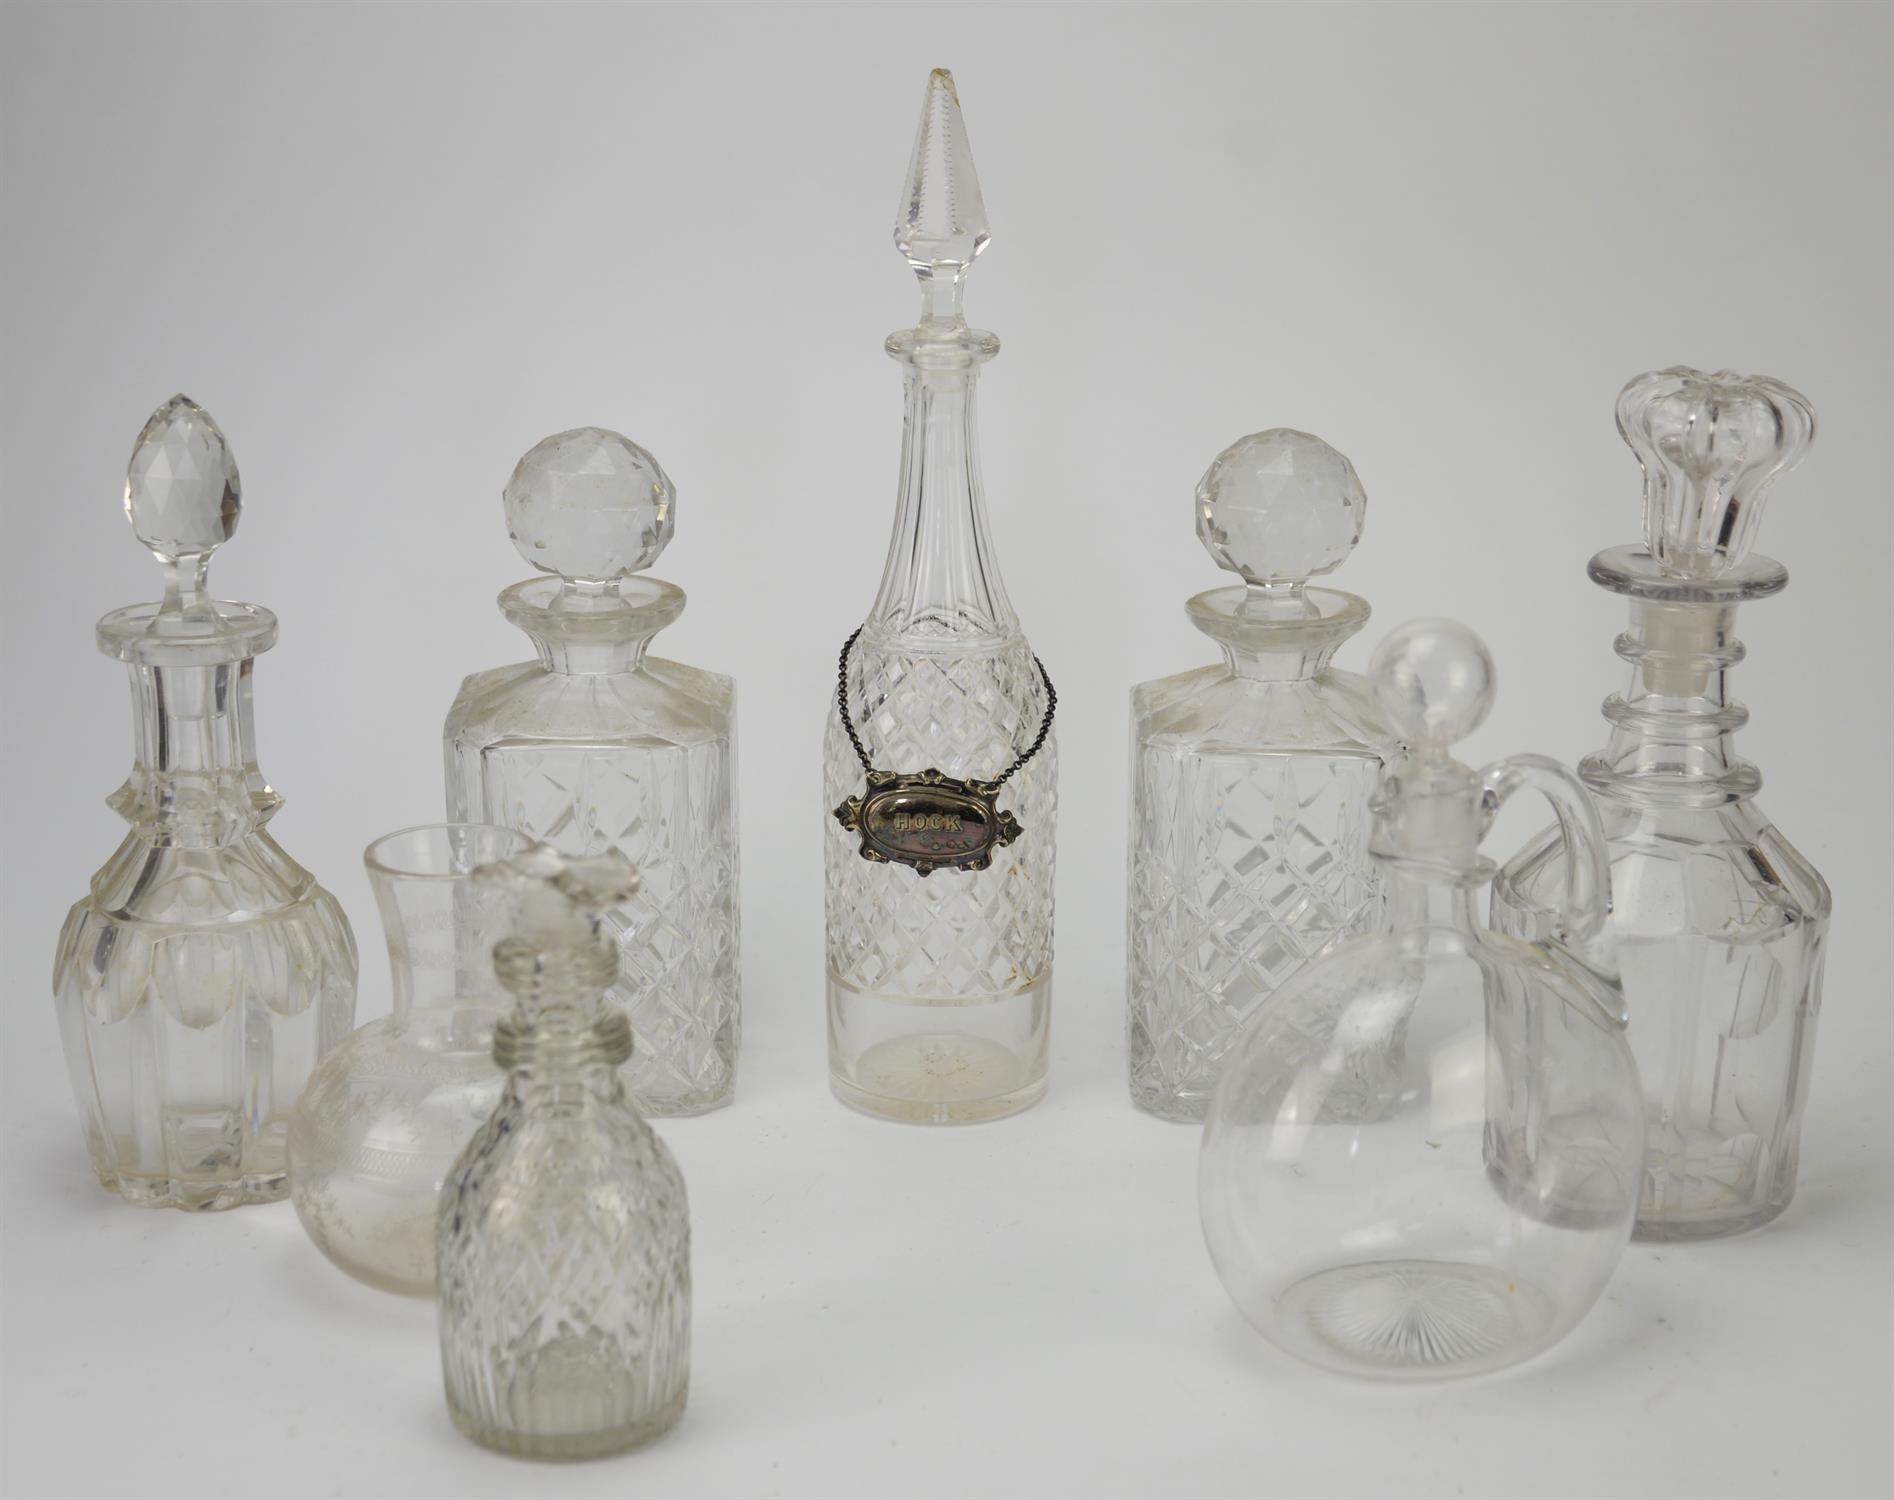 Quantity of drink decanters in differing designs.